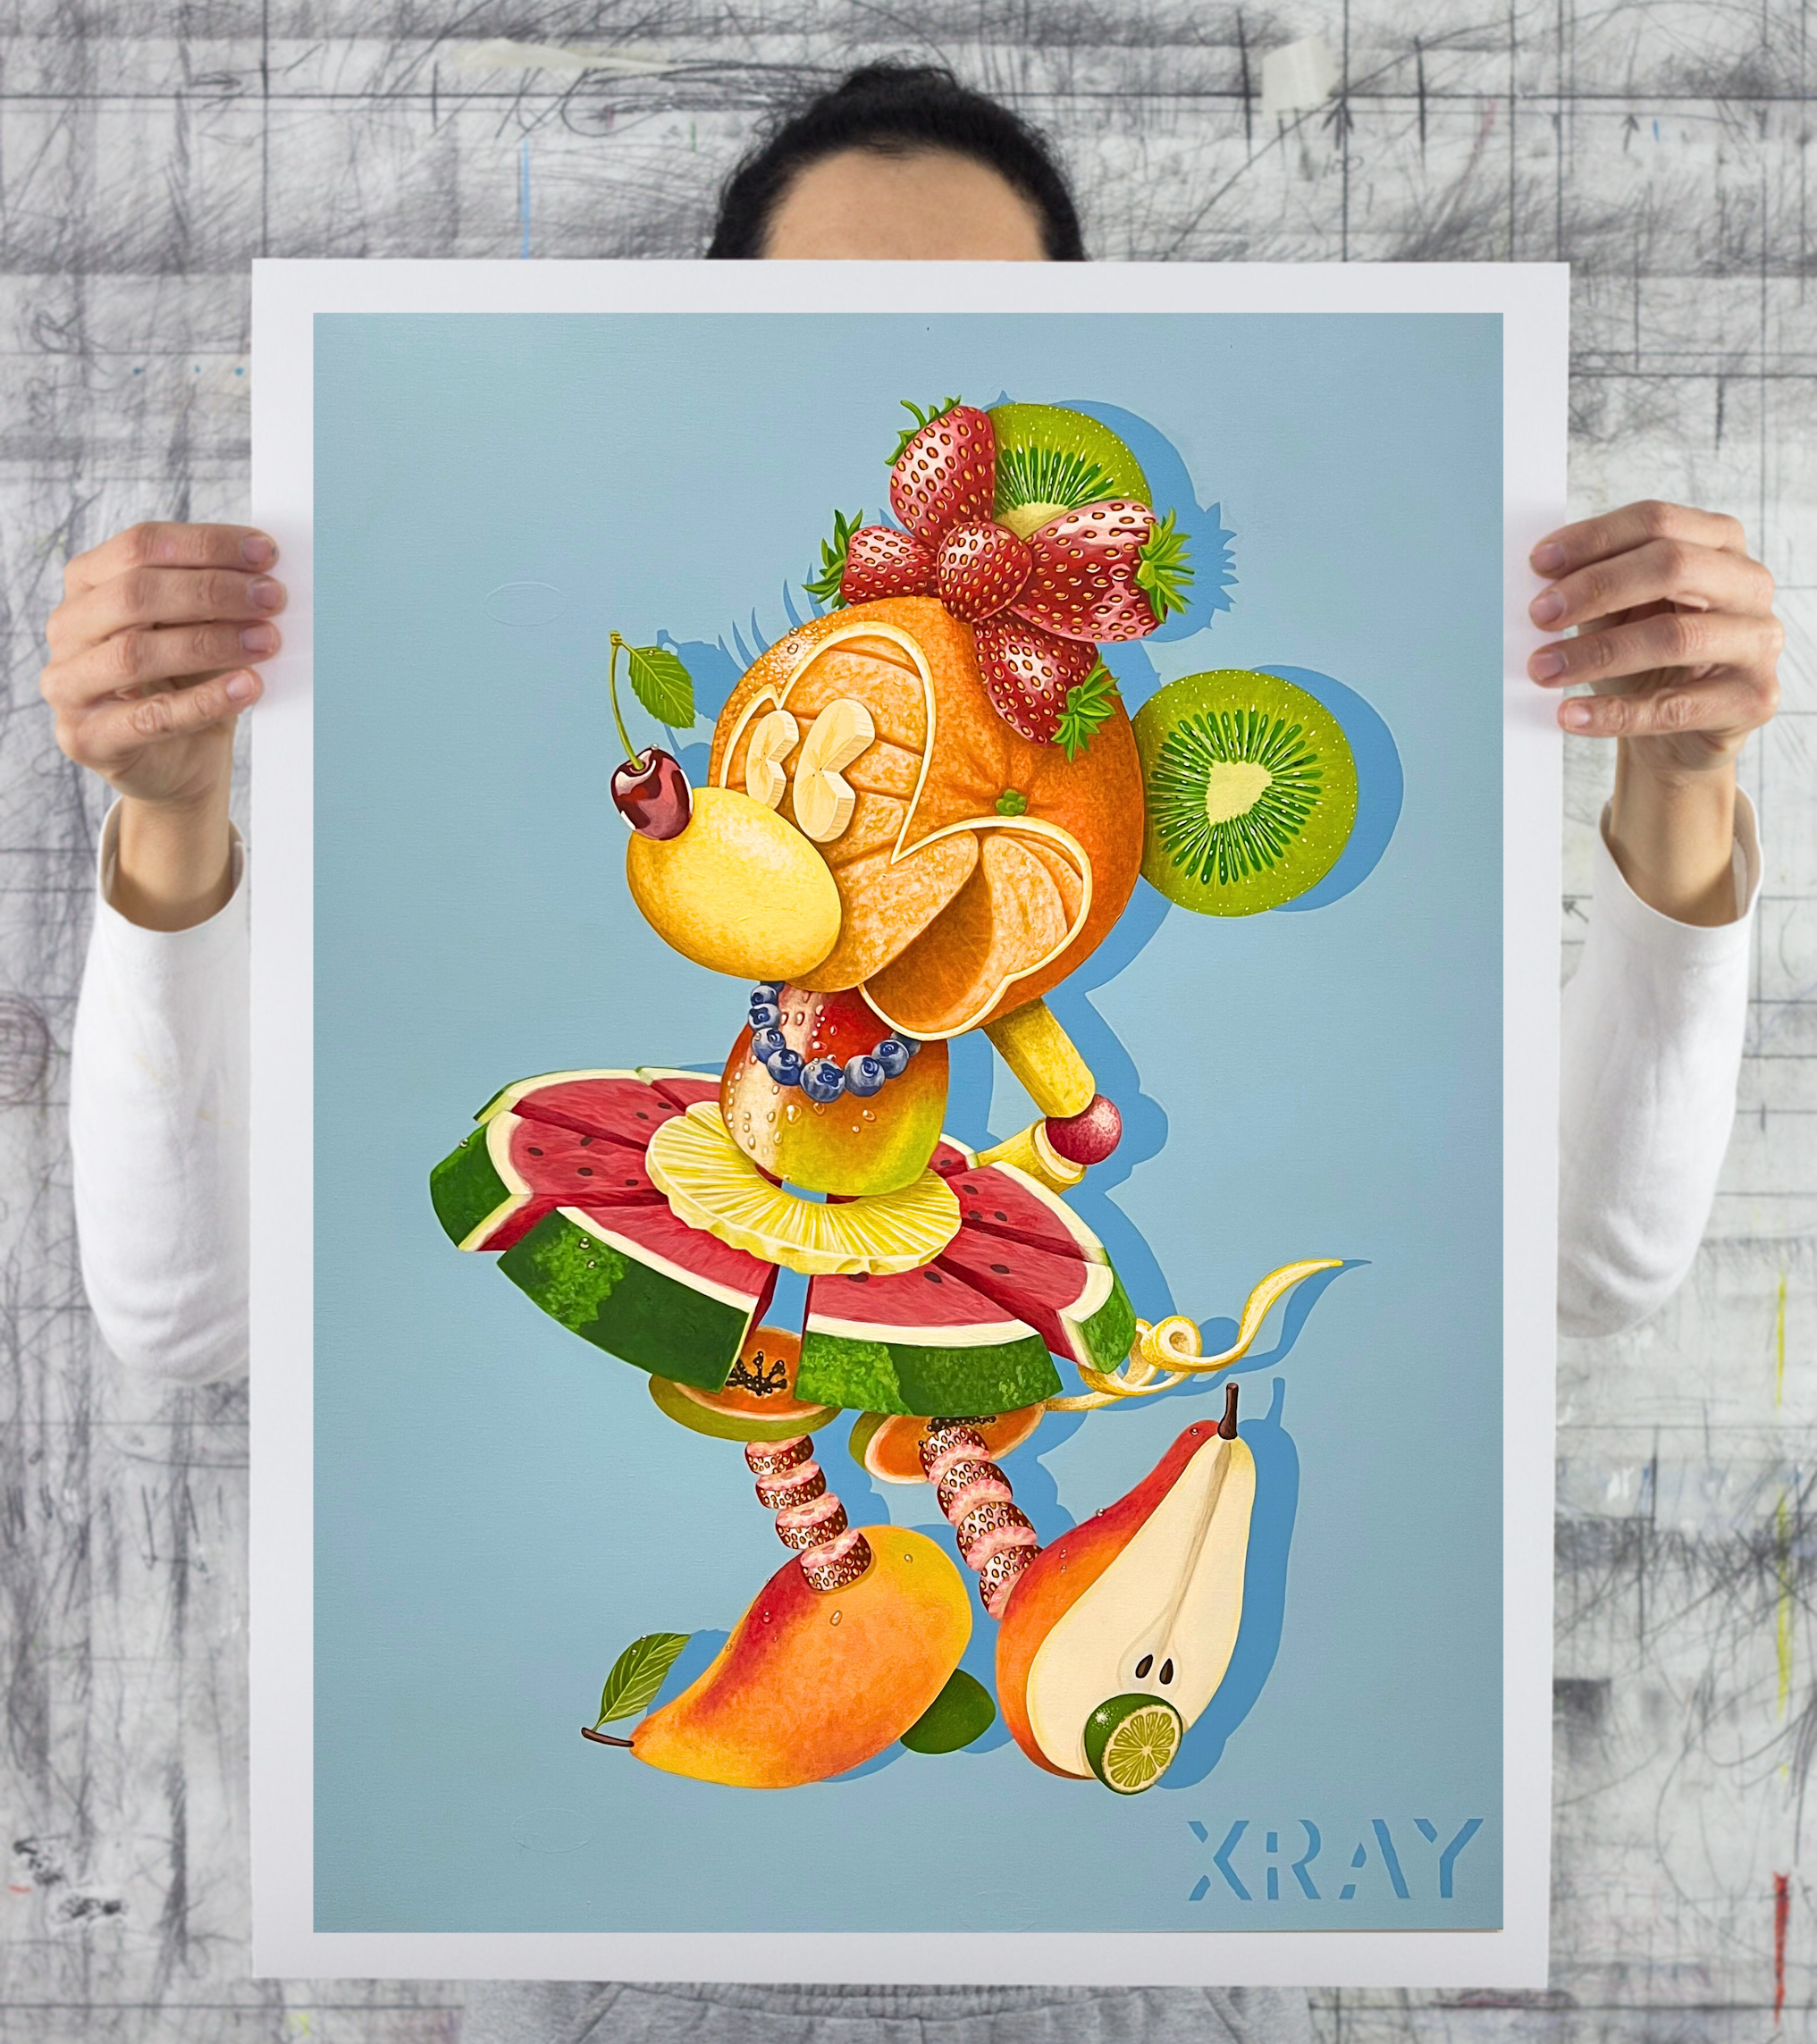 Print of Minnie Silhouette made of Fruit